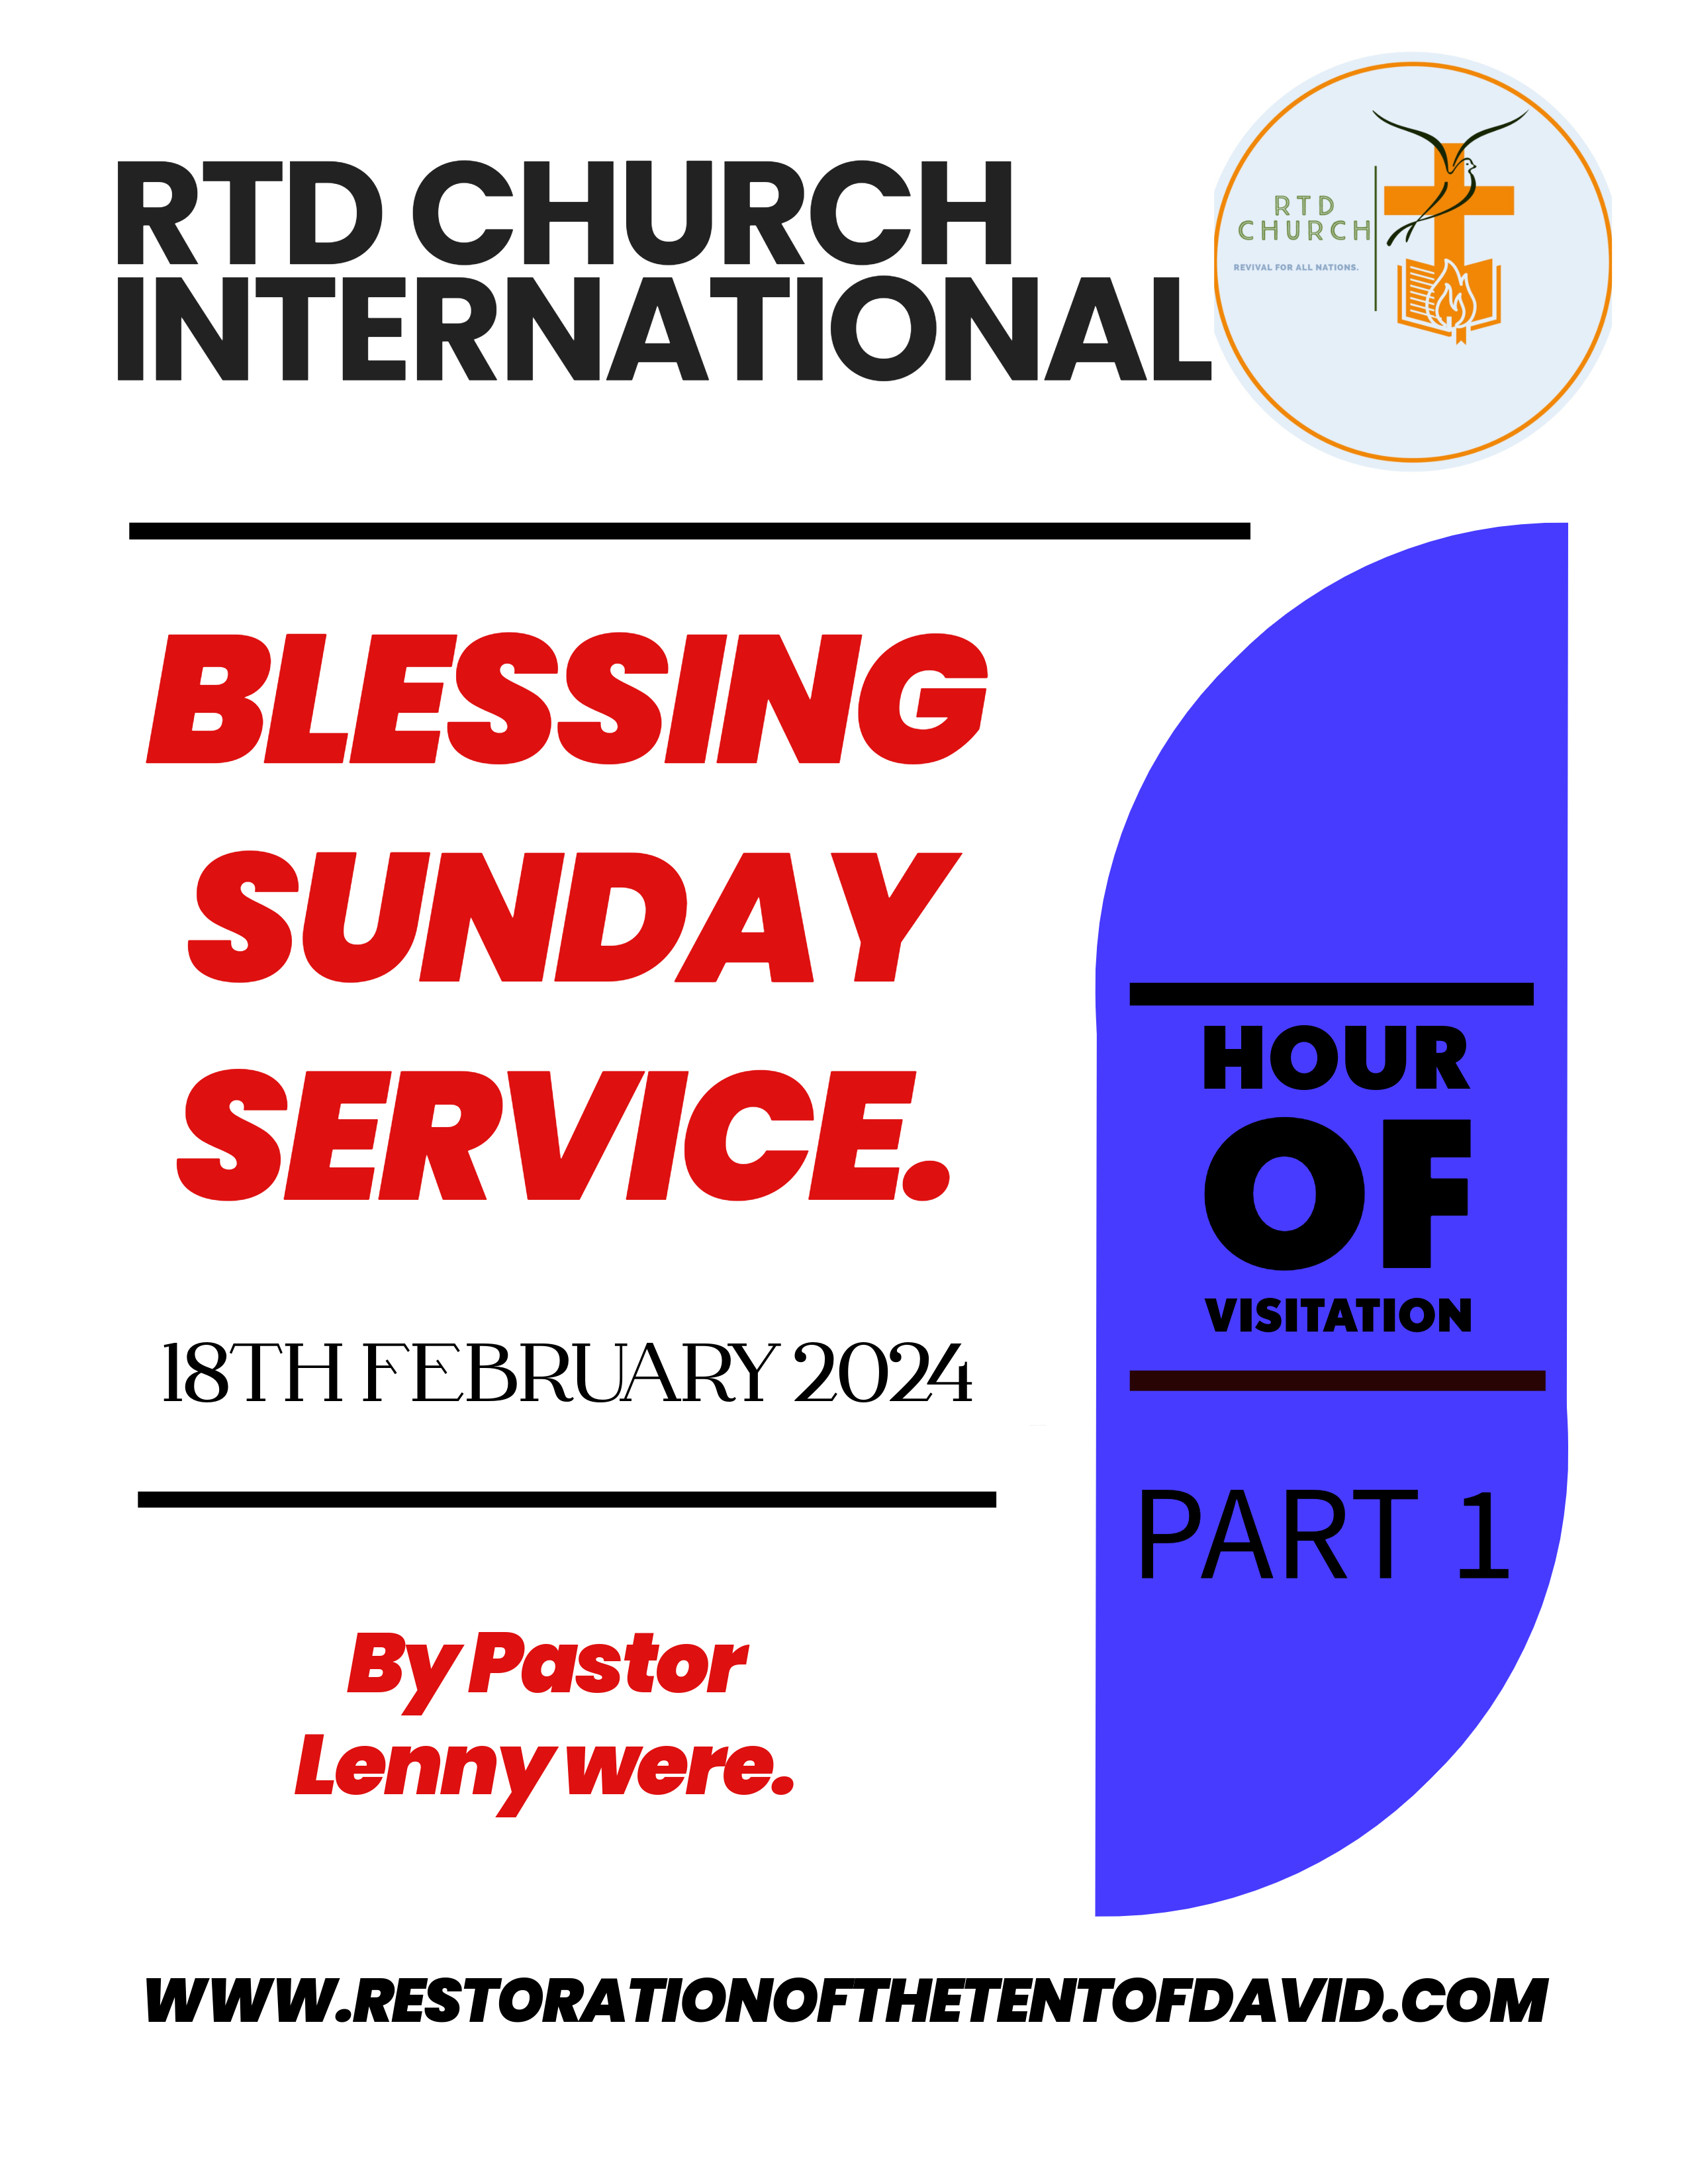 SUNDAY BLESSING SERVICE. 18TH FEBRUARY 2024. PART 1.